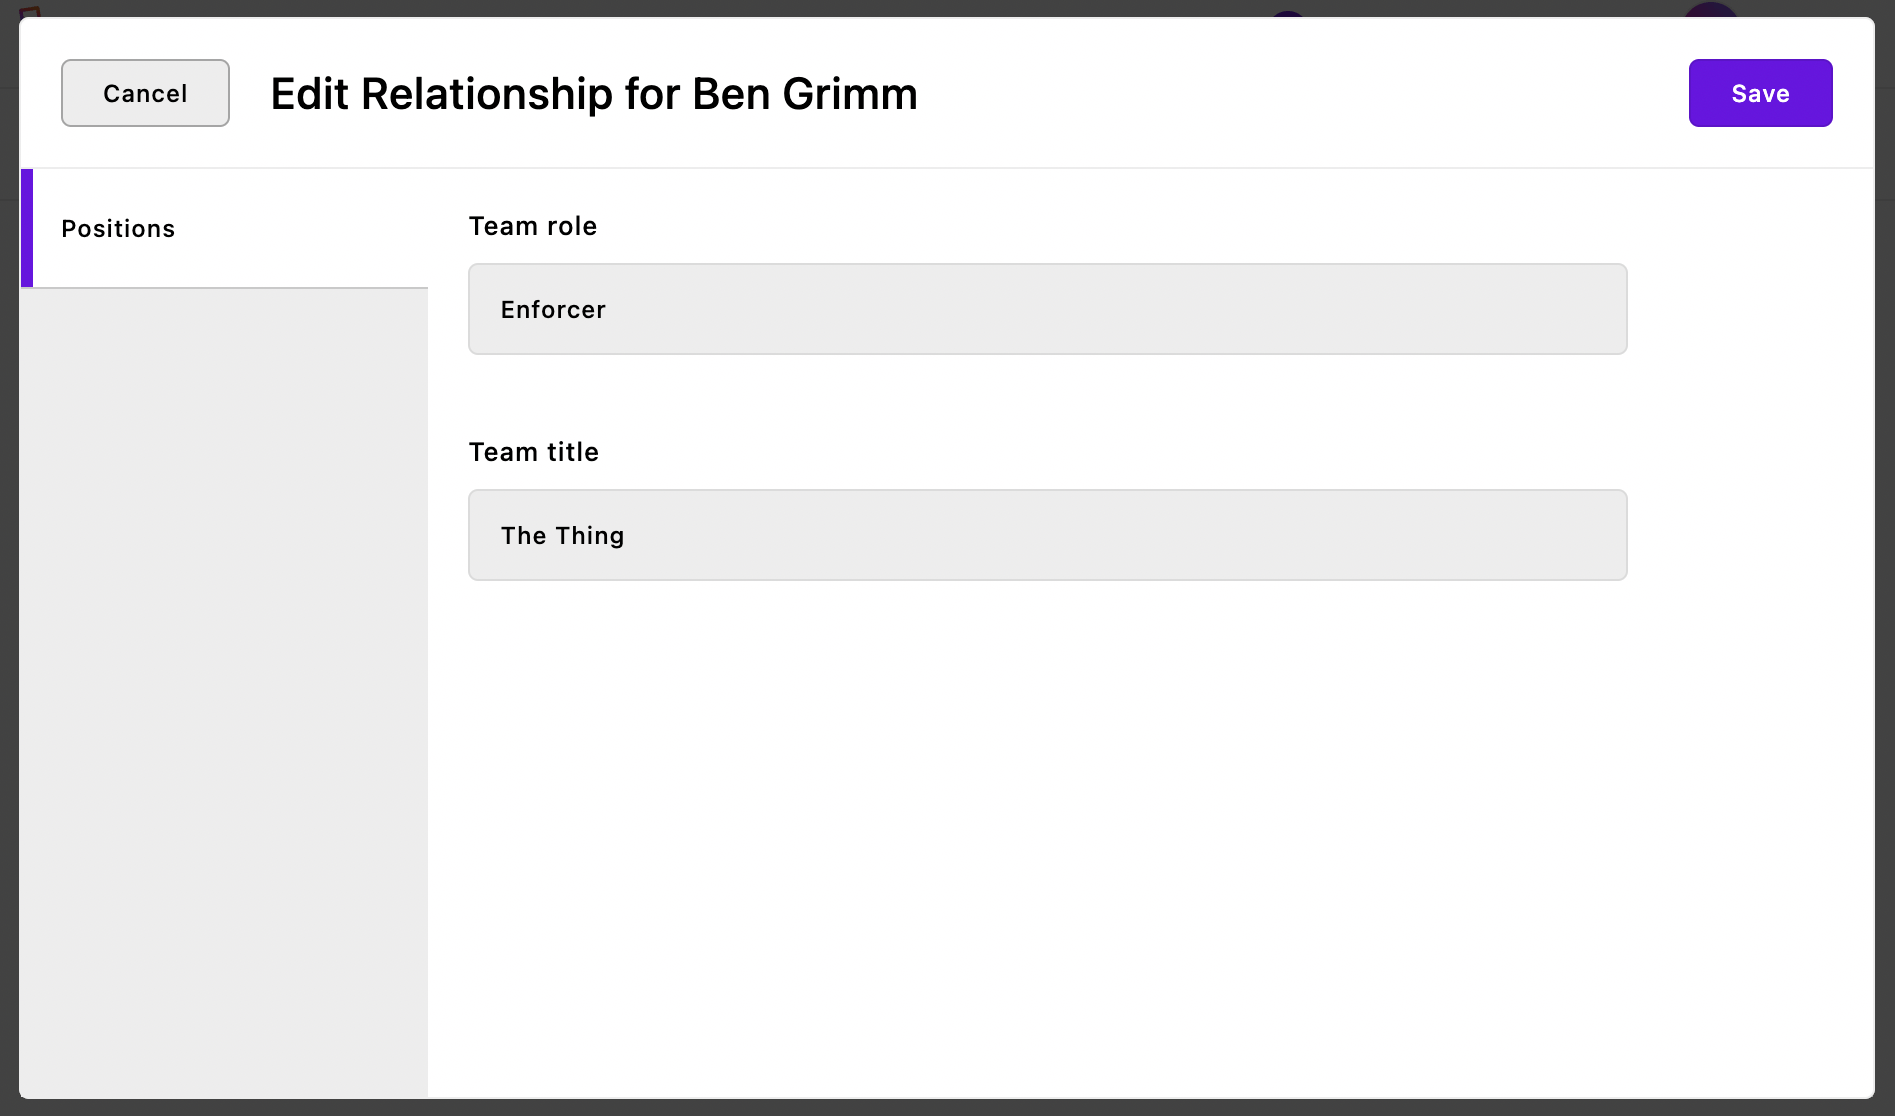 The editor interface for the relationship's "team role" field